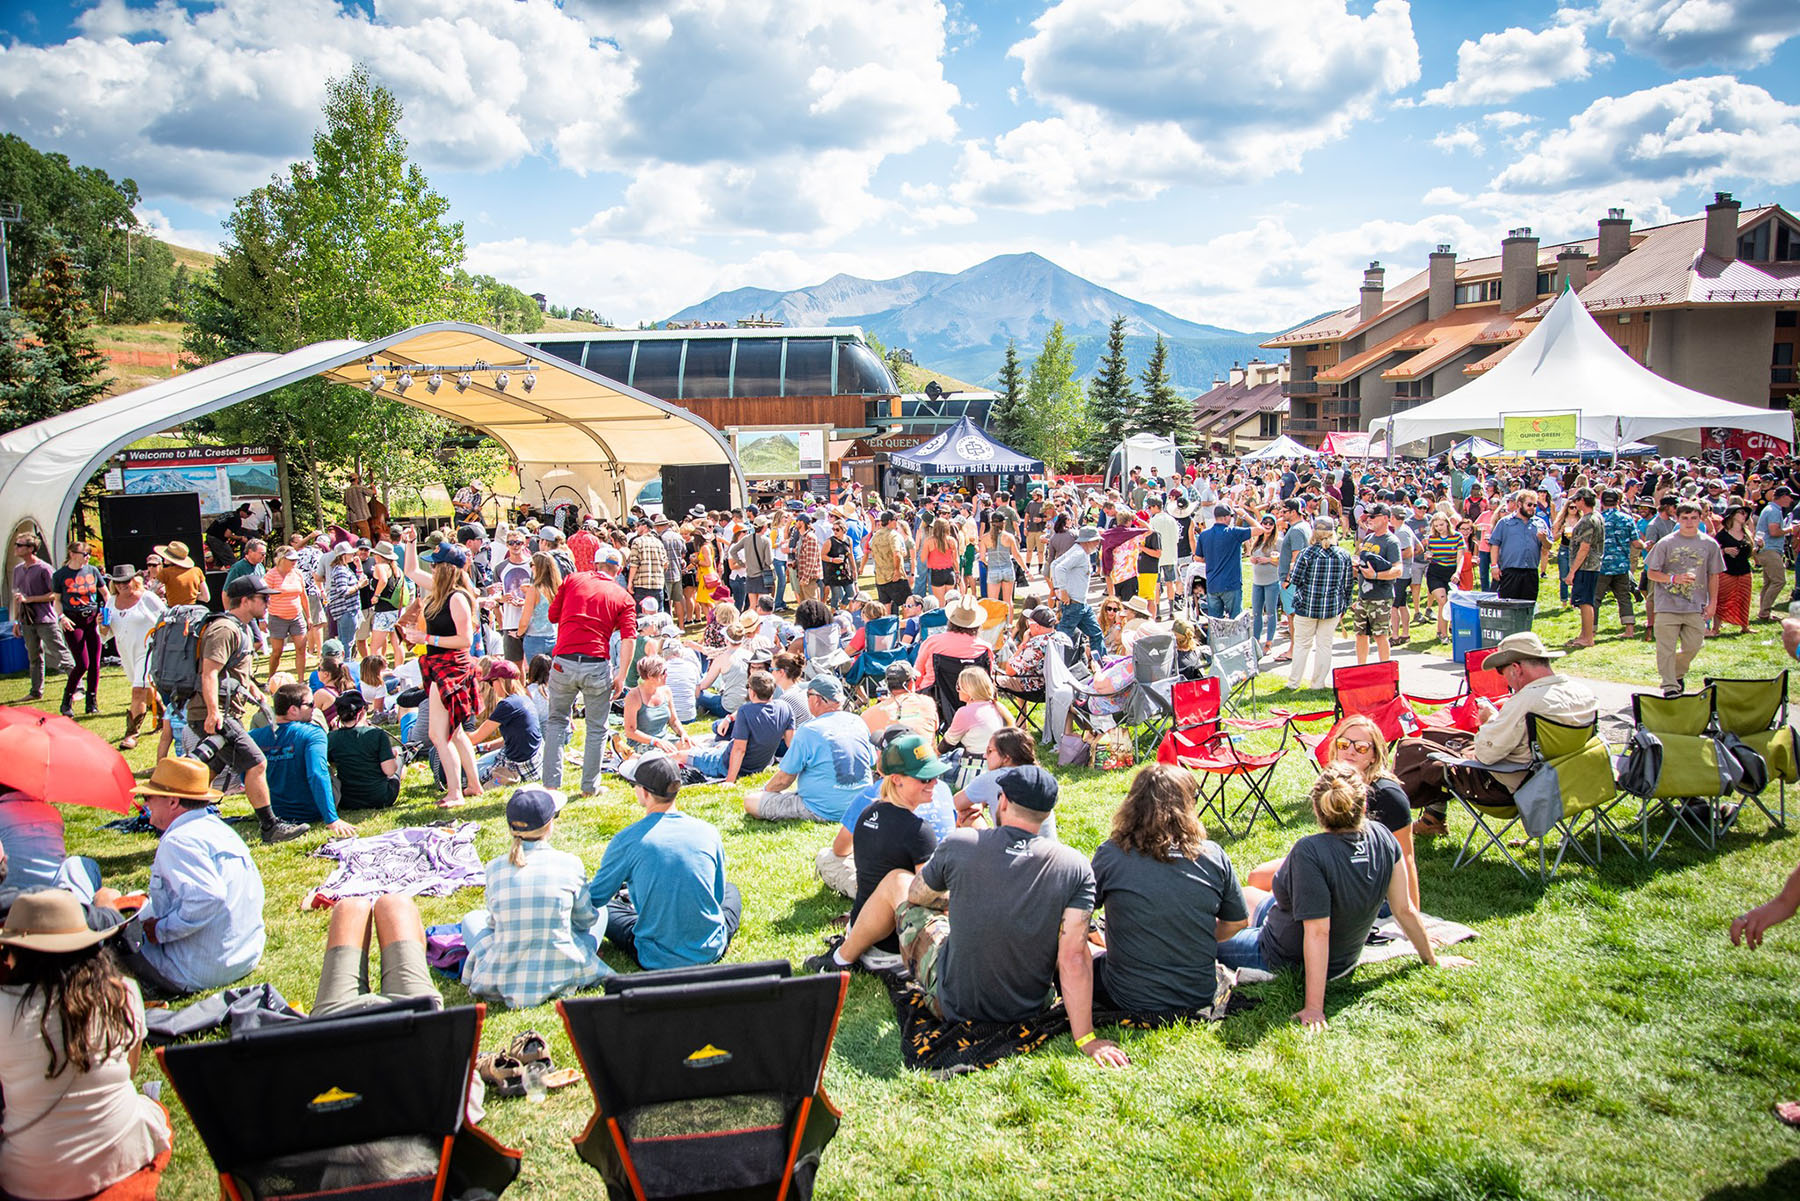 Mount Crested Butte Chili & Beer Festival - Photo Chili & Beer Fest FB Page